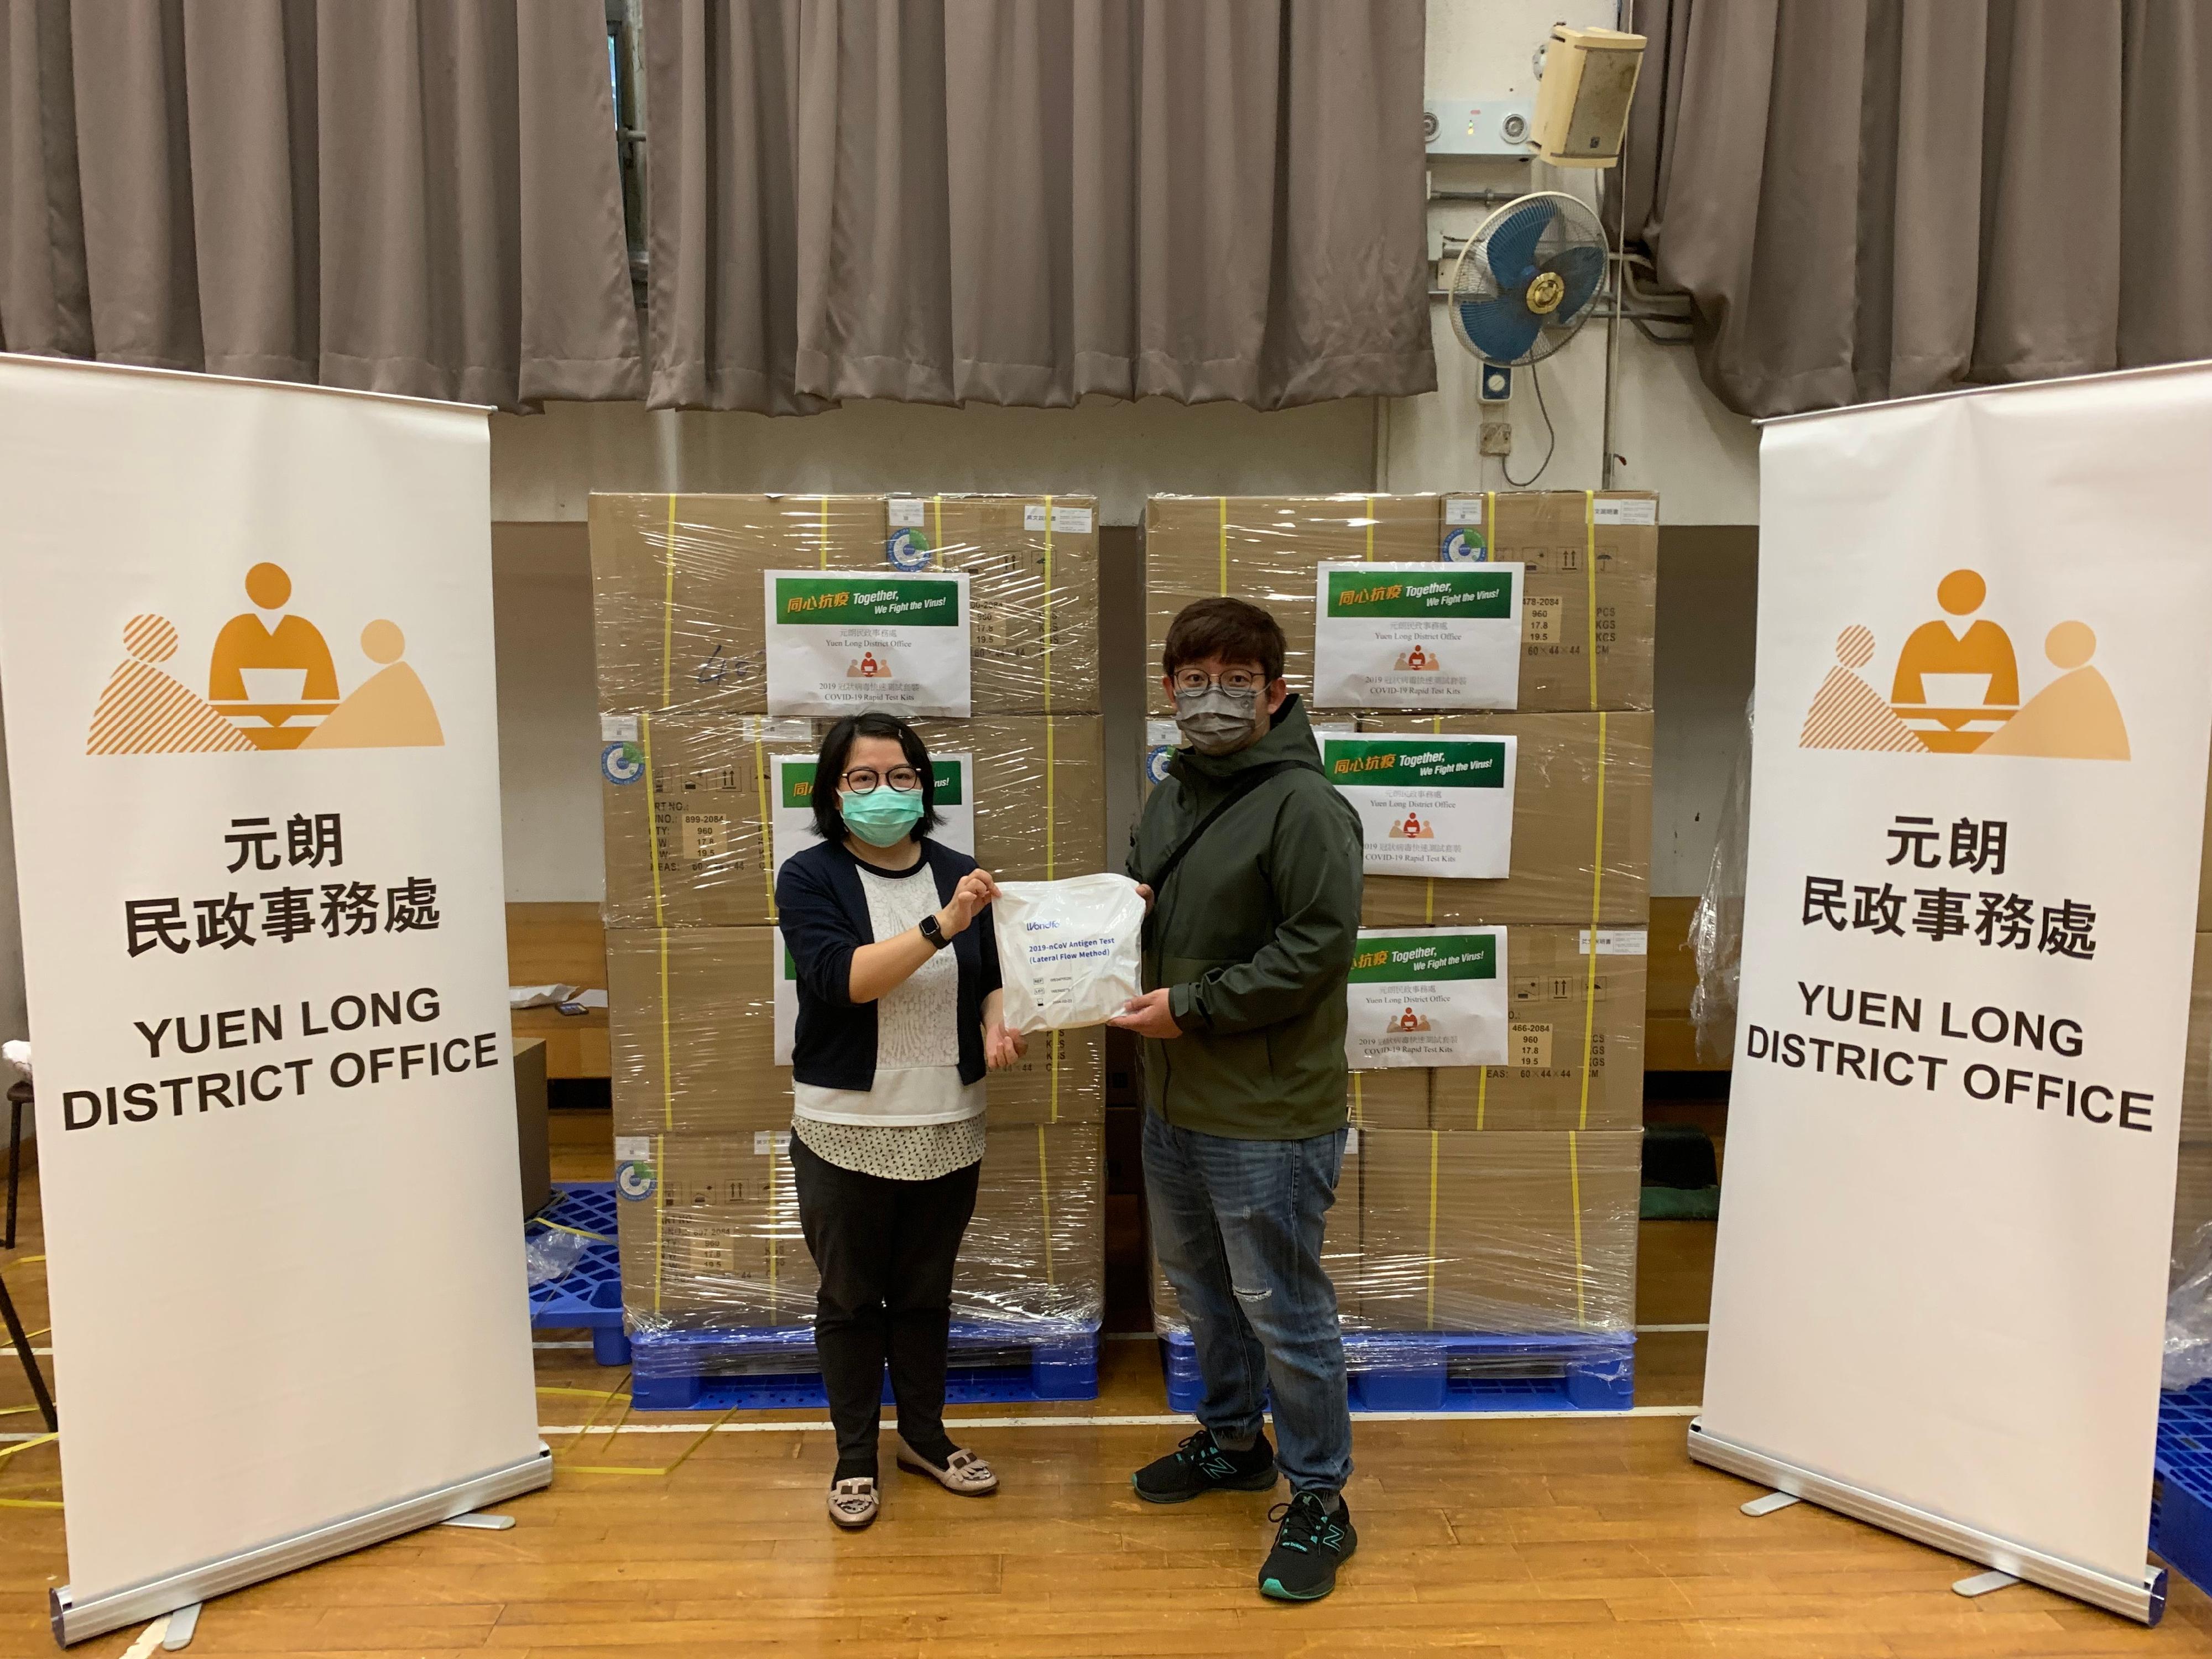 The Yuen Long District Office today (March 25) distributed COVID-19 rapid test kits to households, cleansing workers and property management staff living and working in Atrium House for voluntary testing through the property management company.